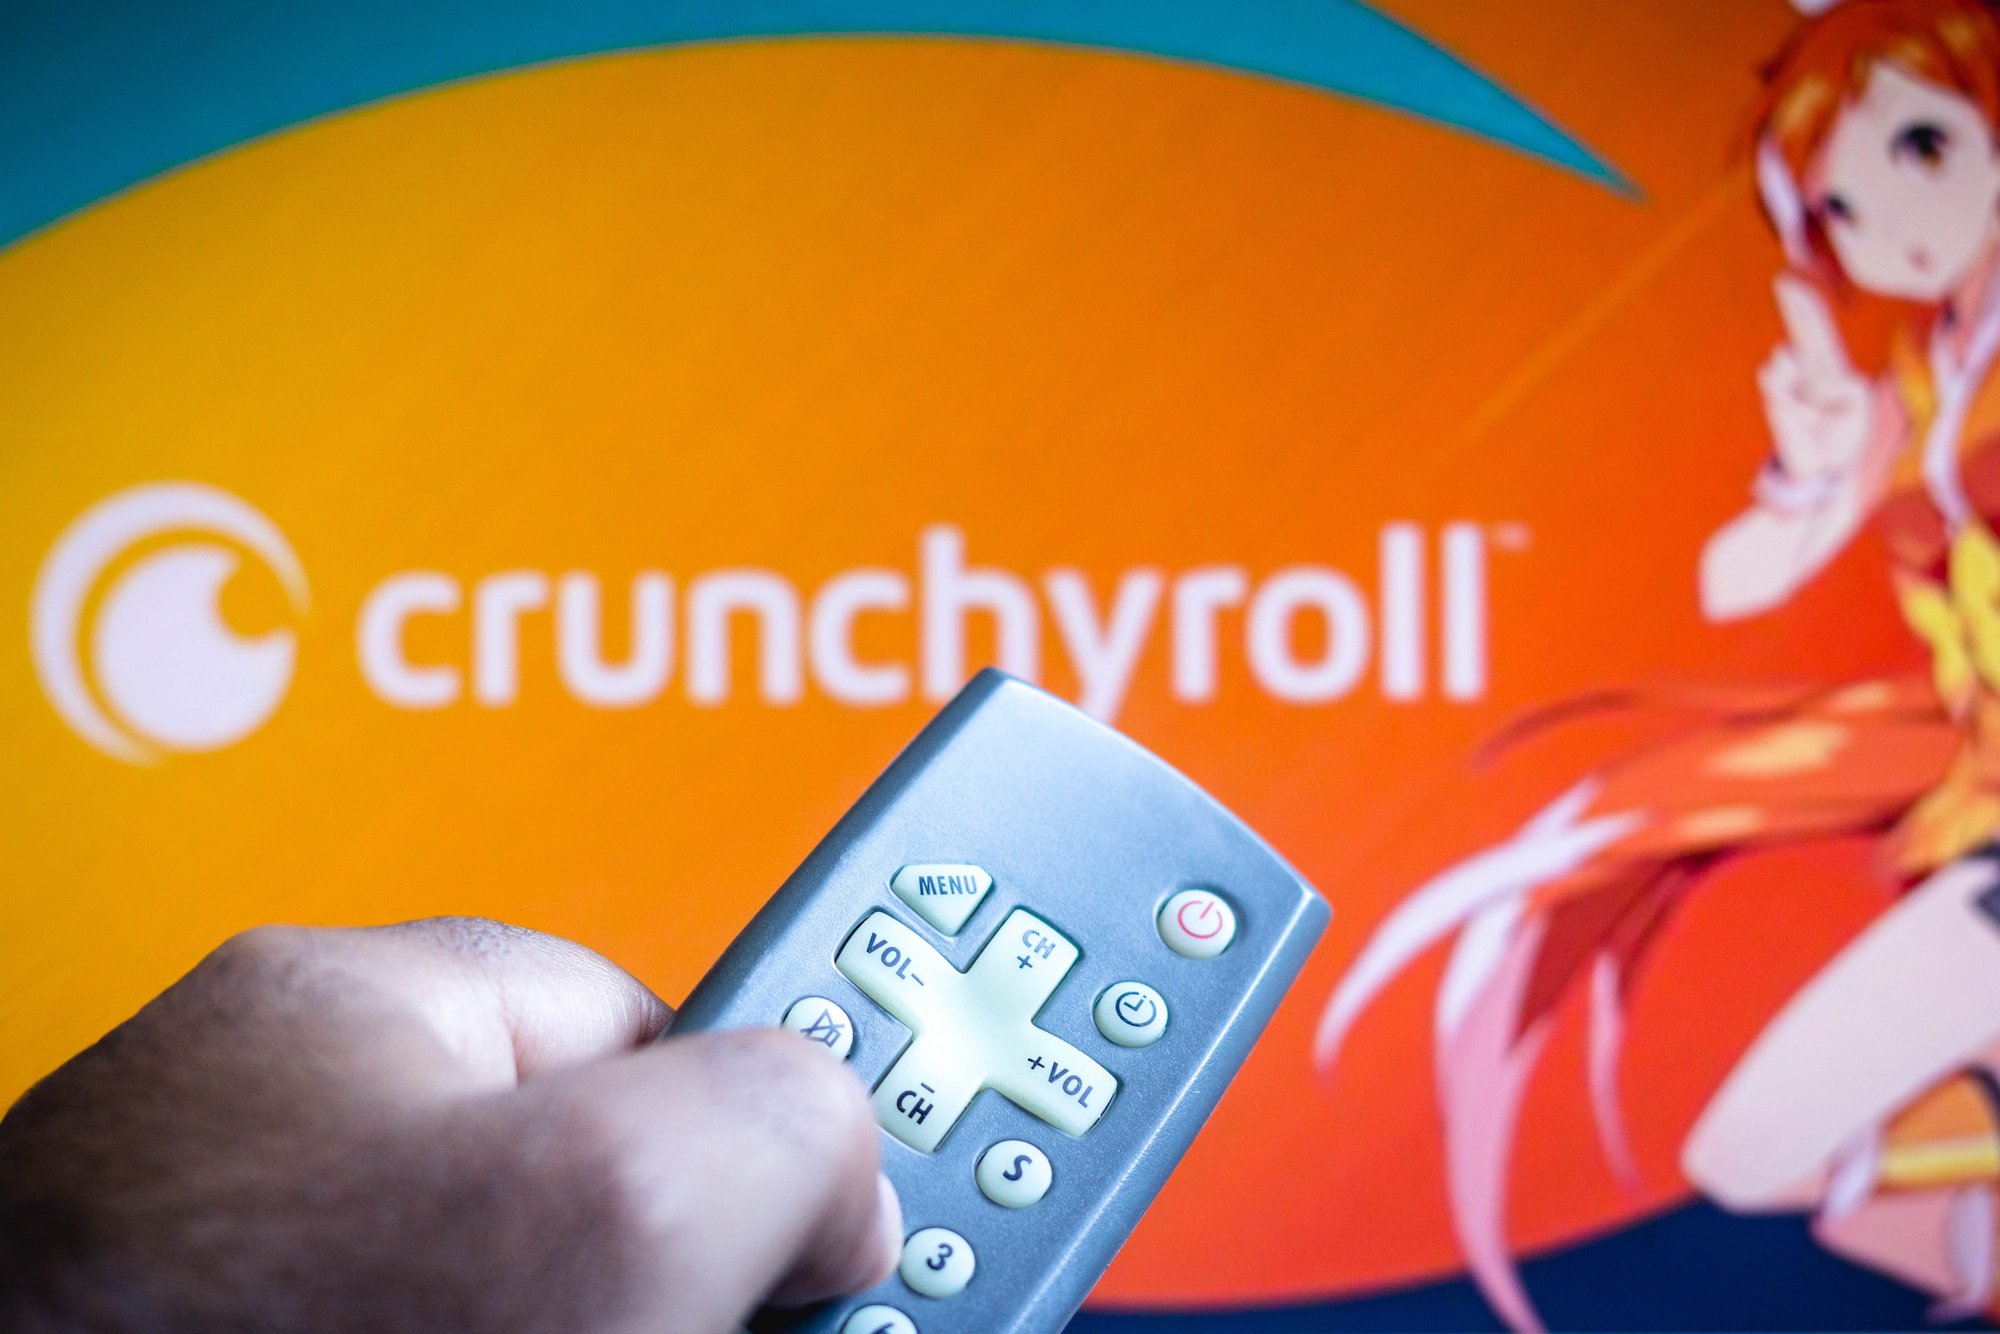 In this photo illustration a close-up of a hand holding a TV remote seen displayed in front of Crunchyroll logo